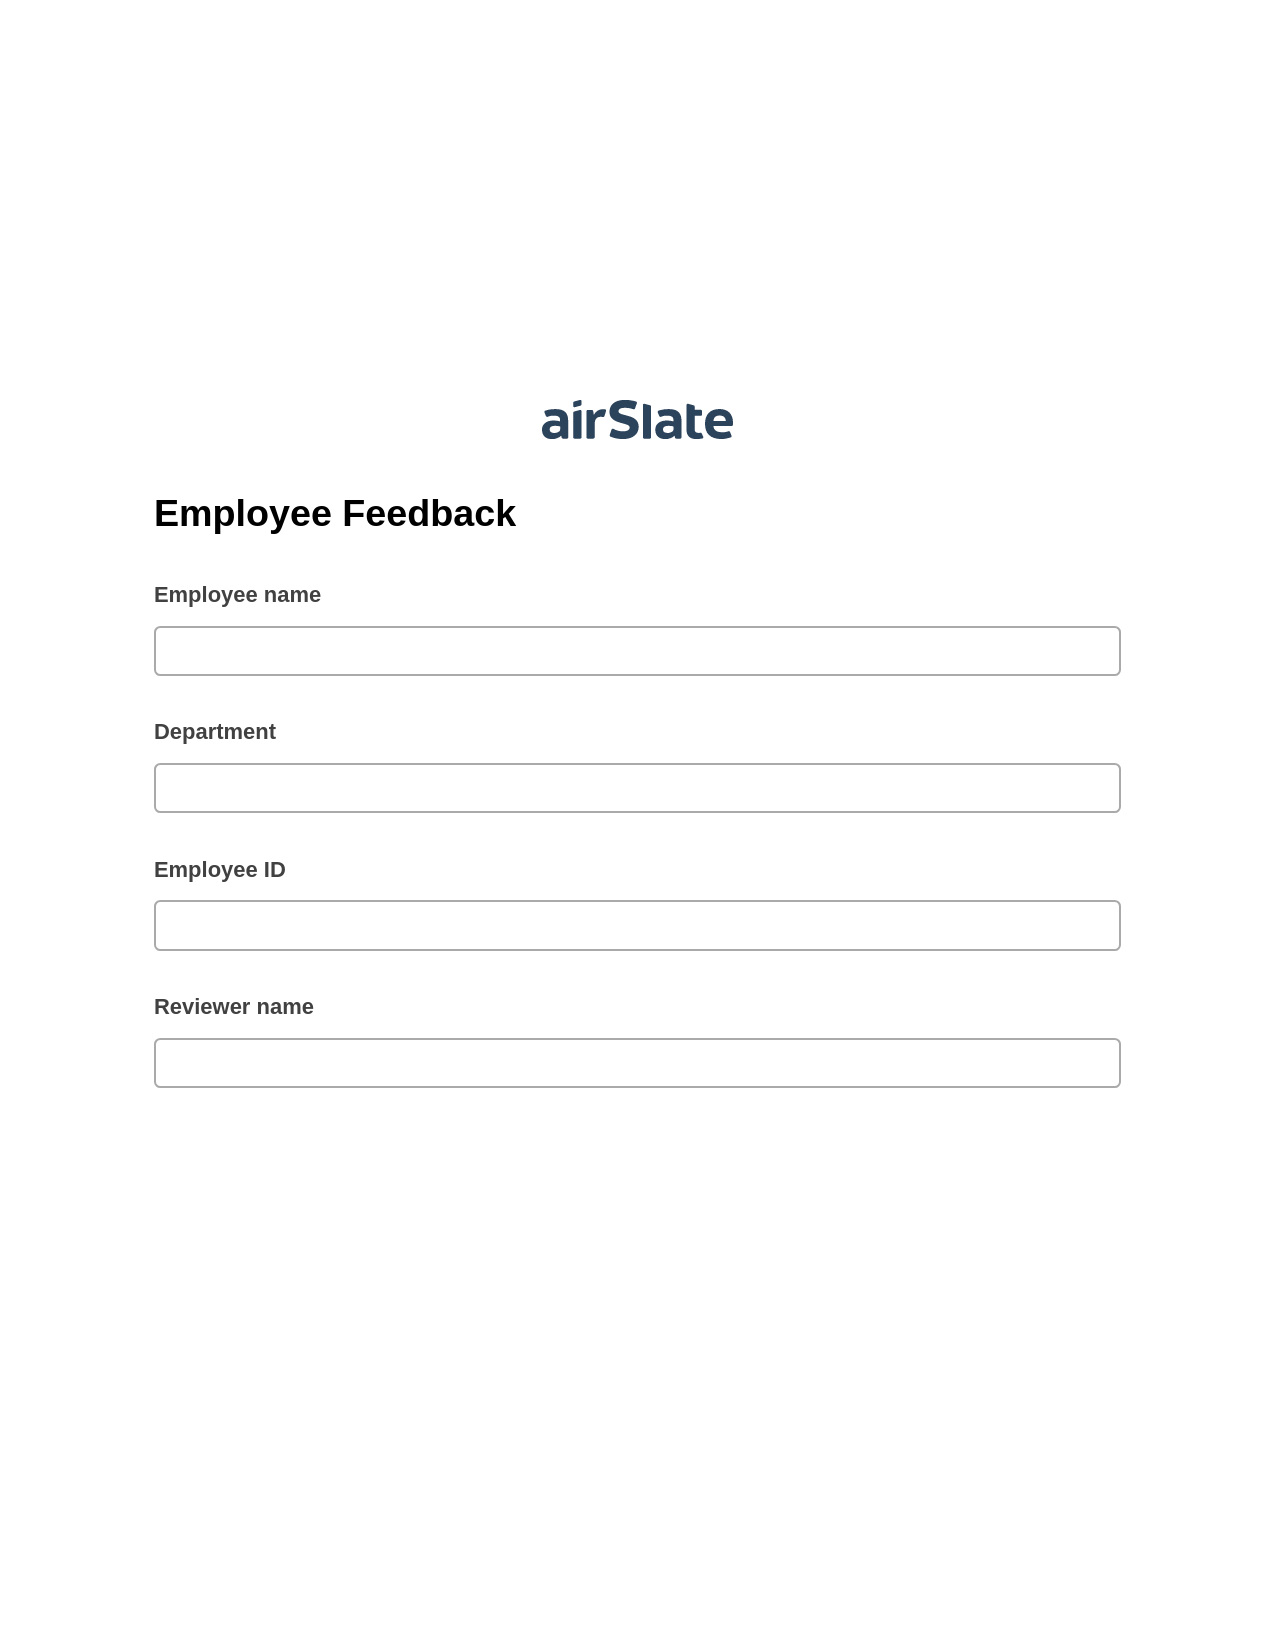 Employee Feedback Pre-fill from Salesforce Records with SOQL Bot, Mailchimp send Campaign bot, Export to Excel 365 Bot